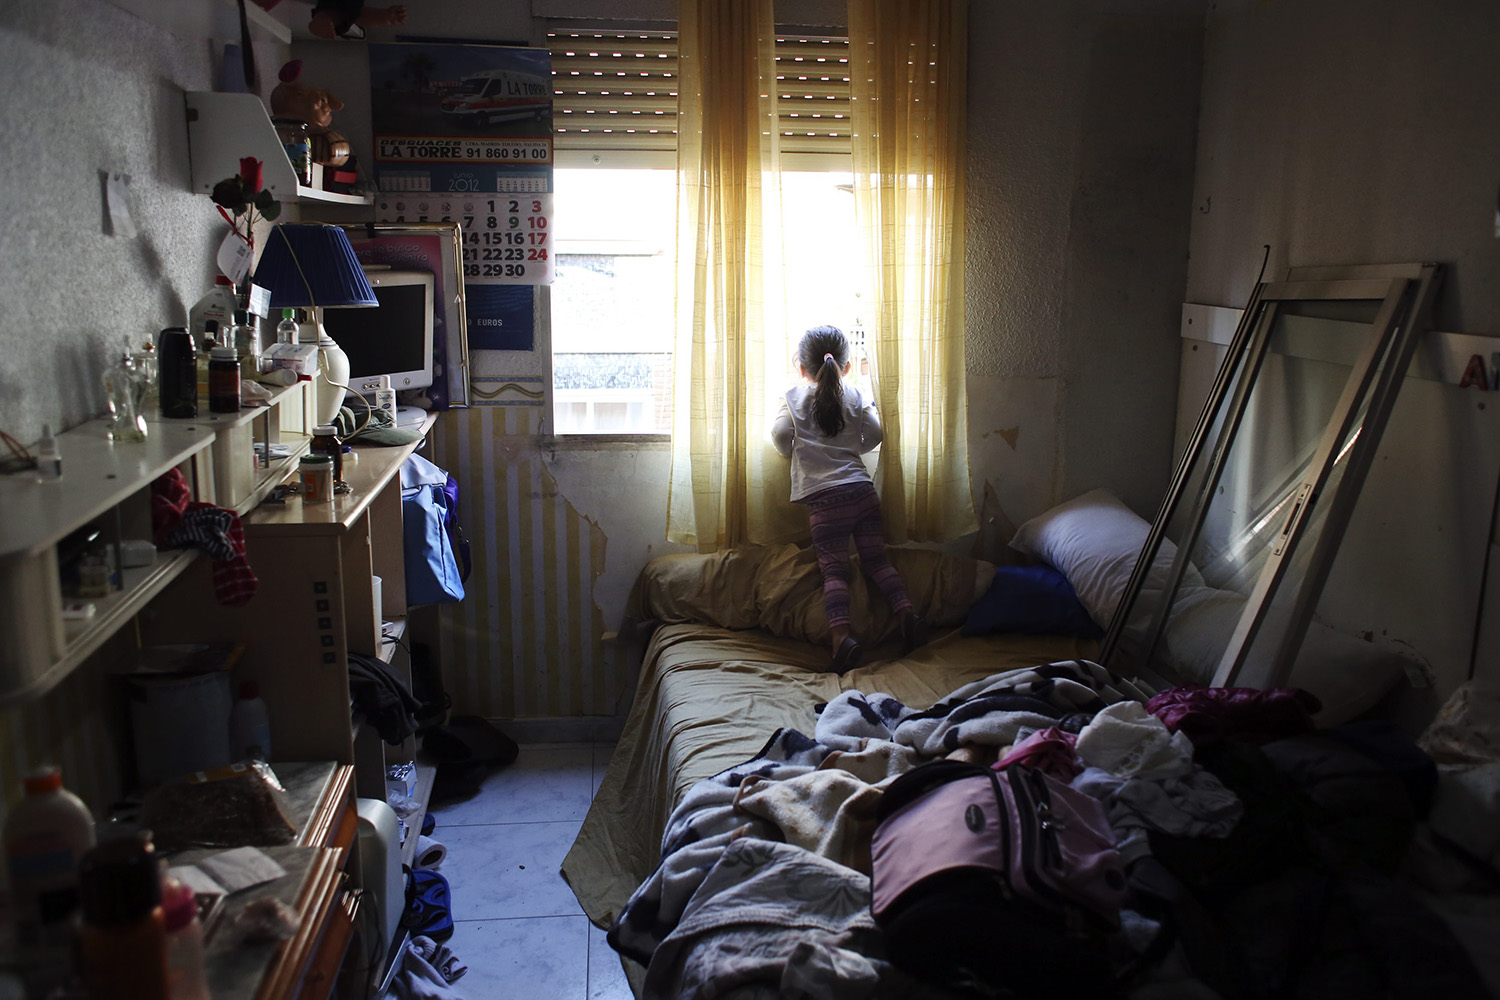 Dayana Chasi Saavedra looks through window after news that their eviction was not going to be carried out, in Madrid